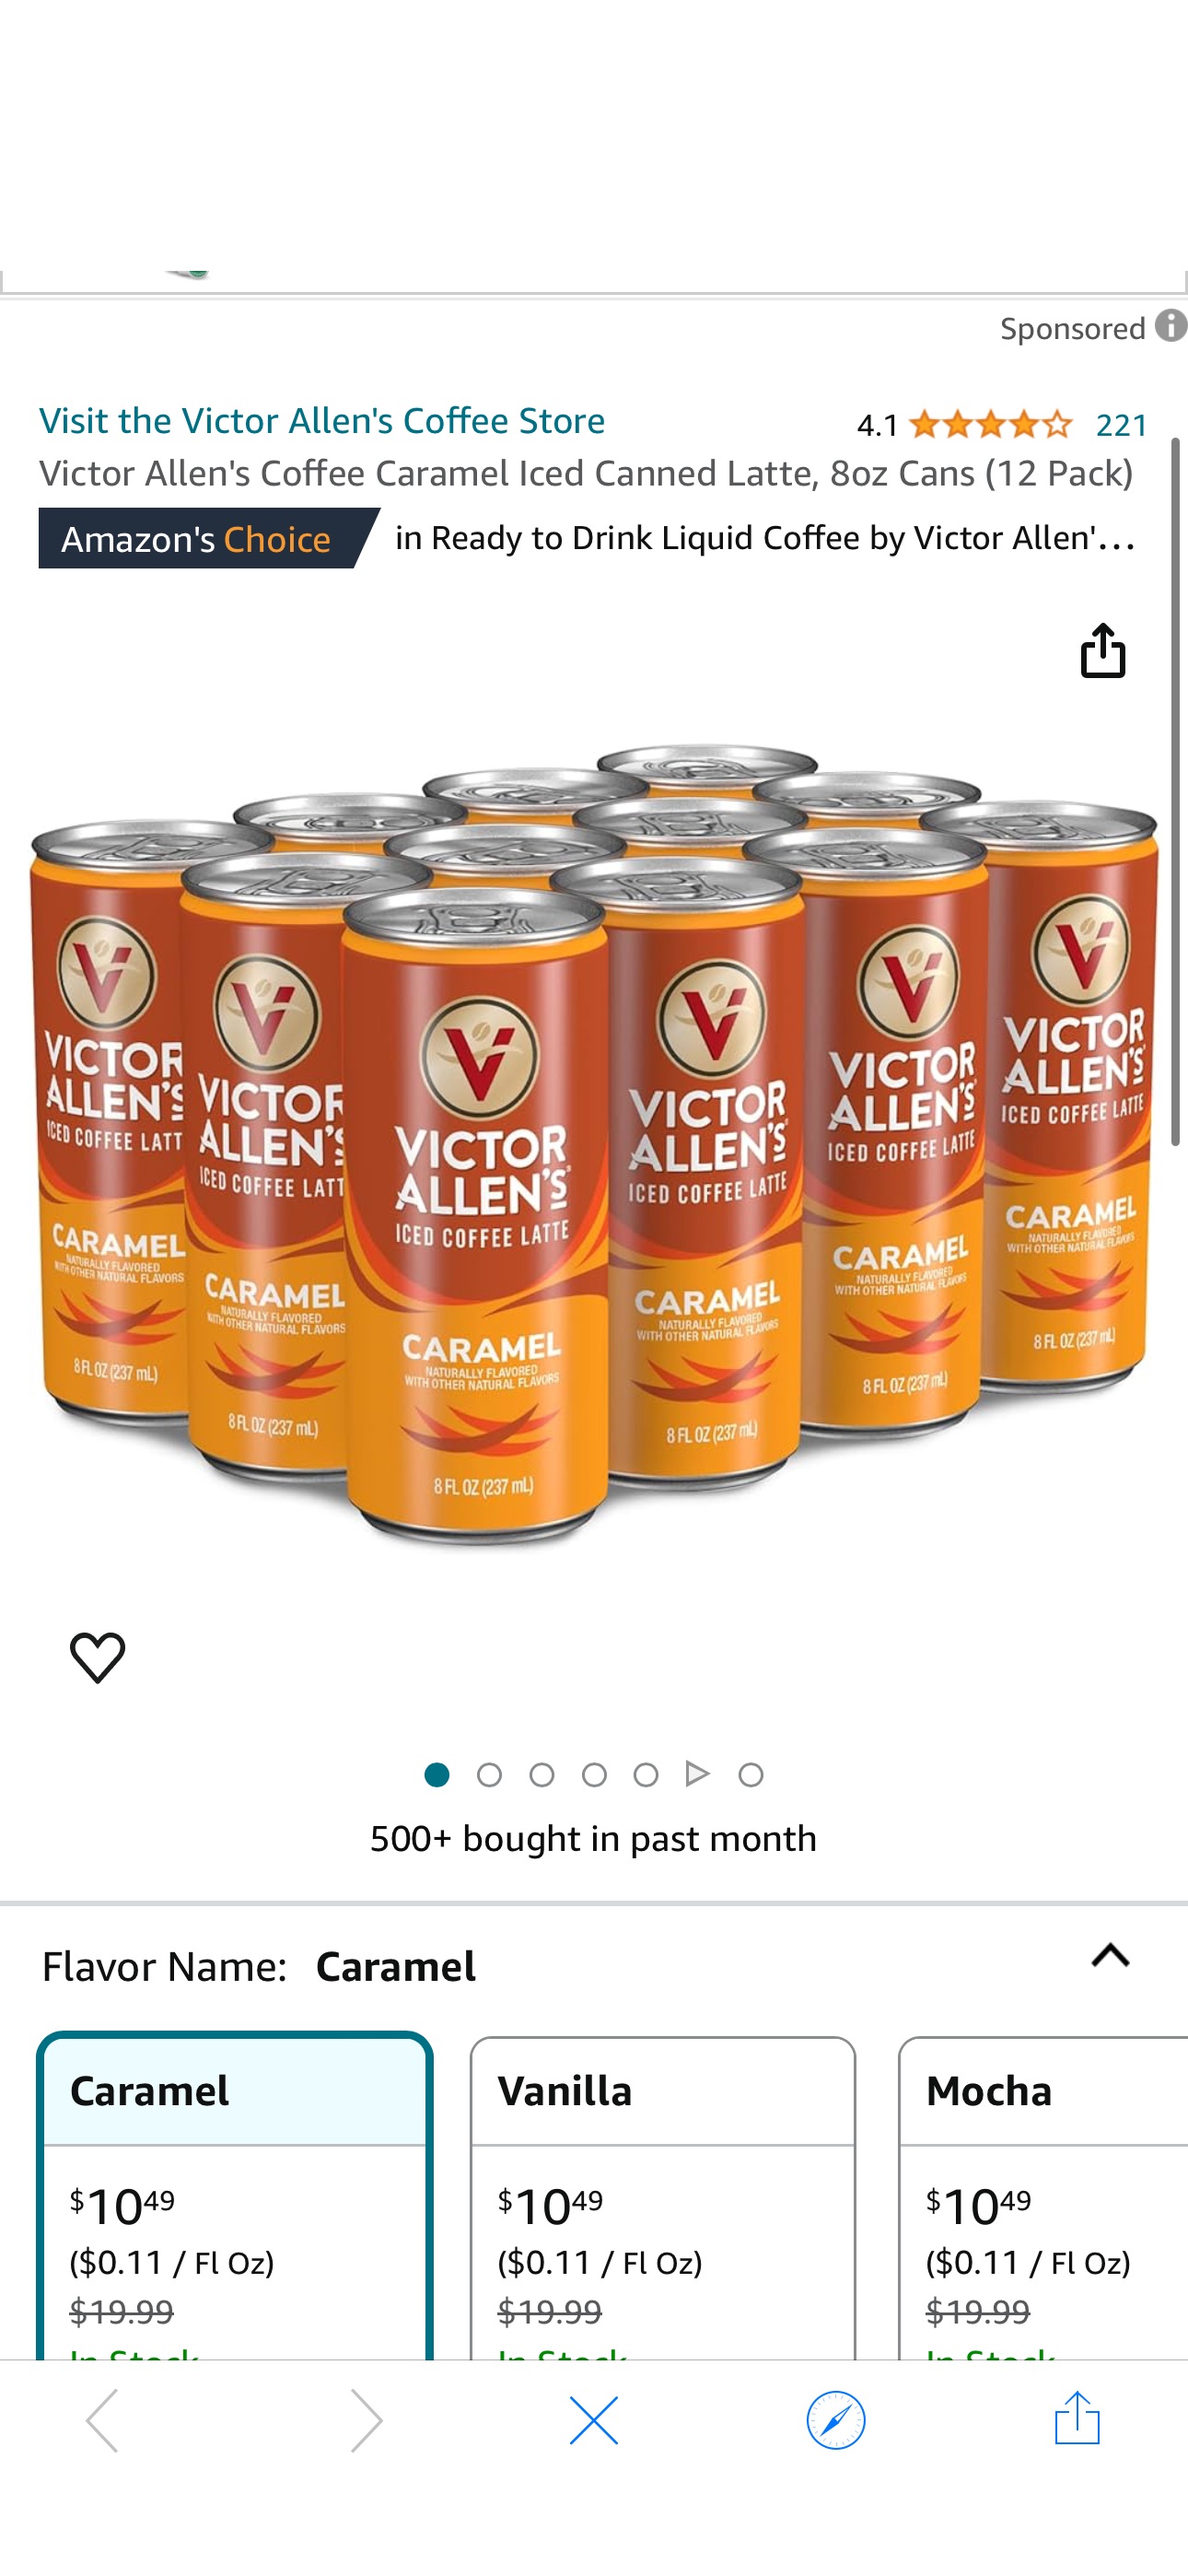 Amazon.com : Victor Allen's Coffee Caramel Iced Canned Latte, 8oz Cans (12 Pack) : Everything Else